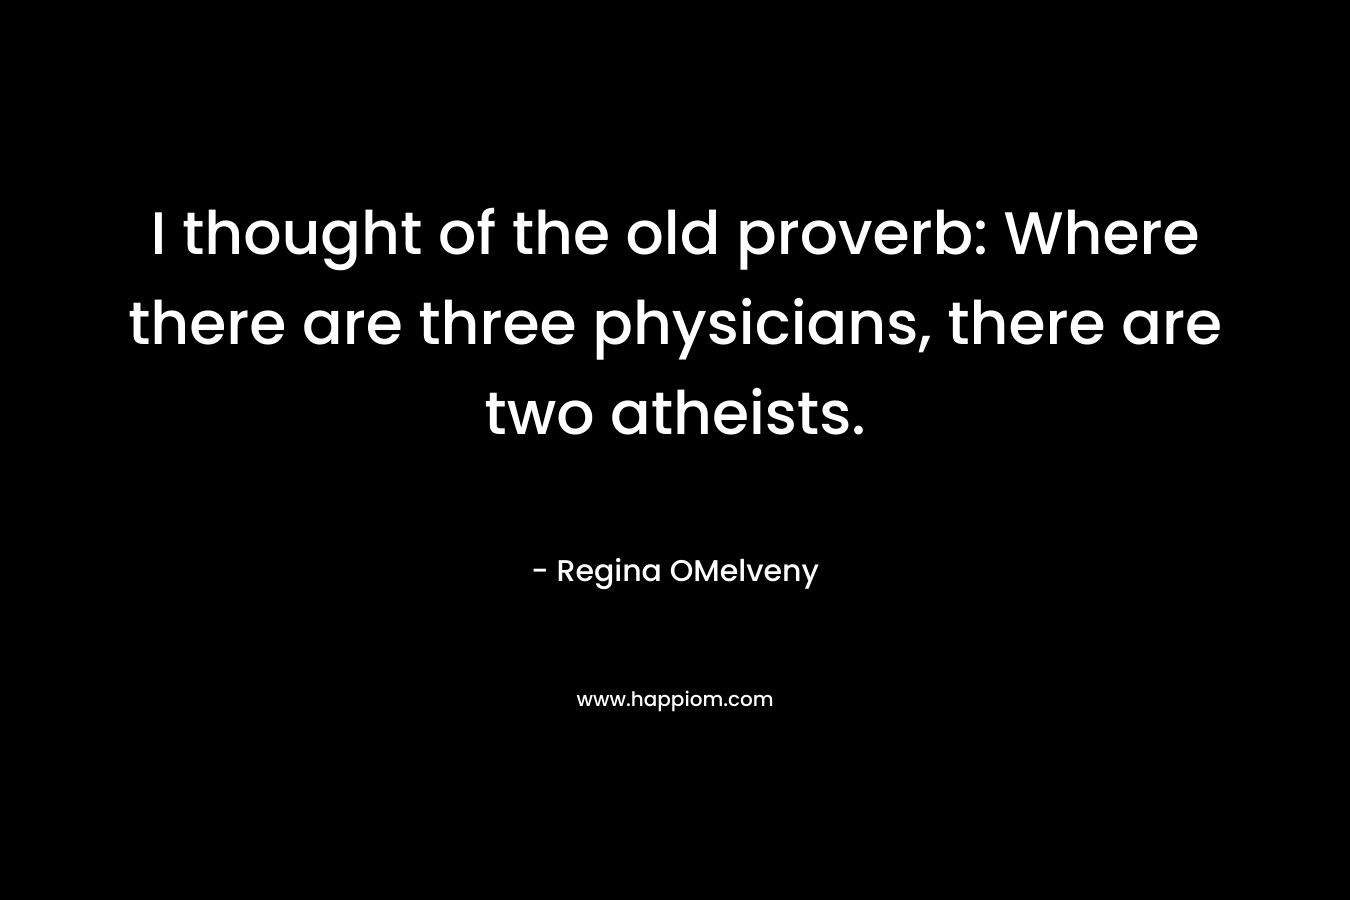 I thought of the old proverb: Where there are three physicians, there are two atheists. – Regina OMelveny